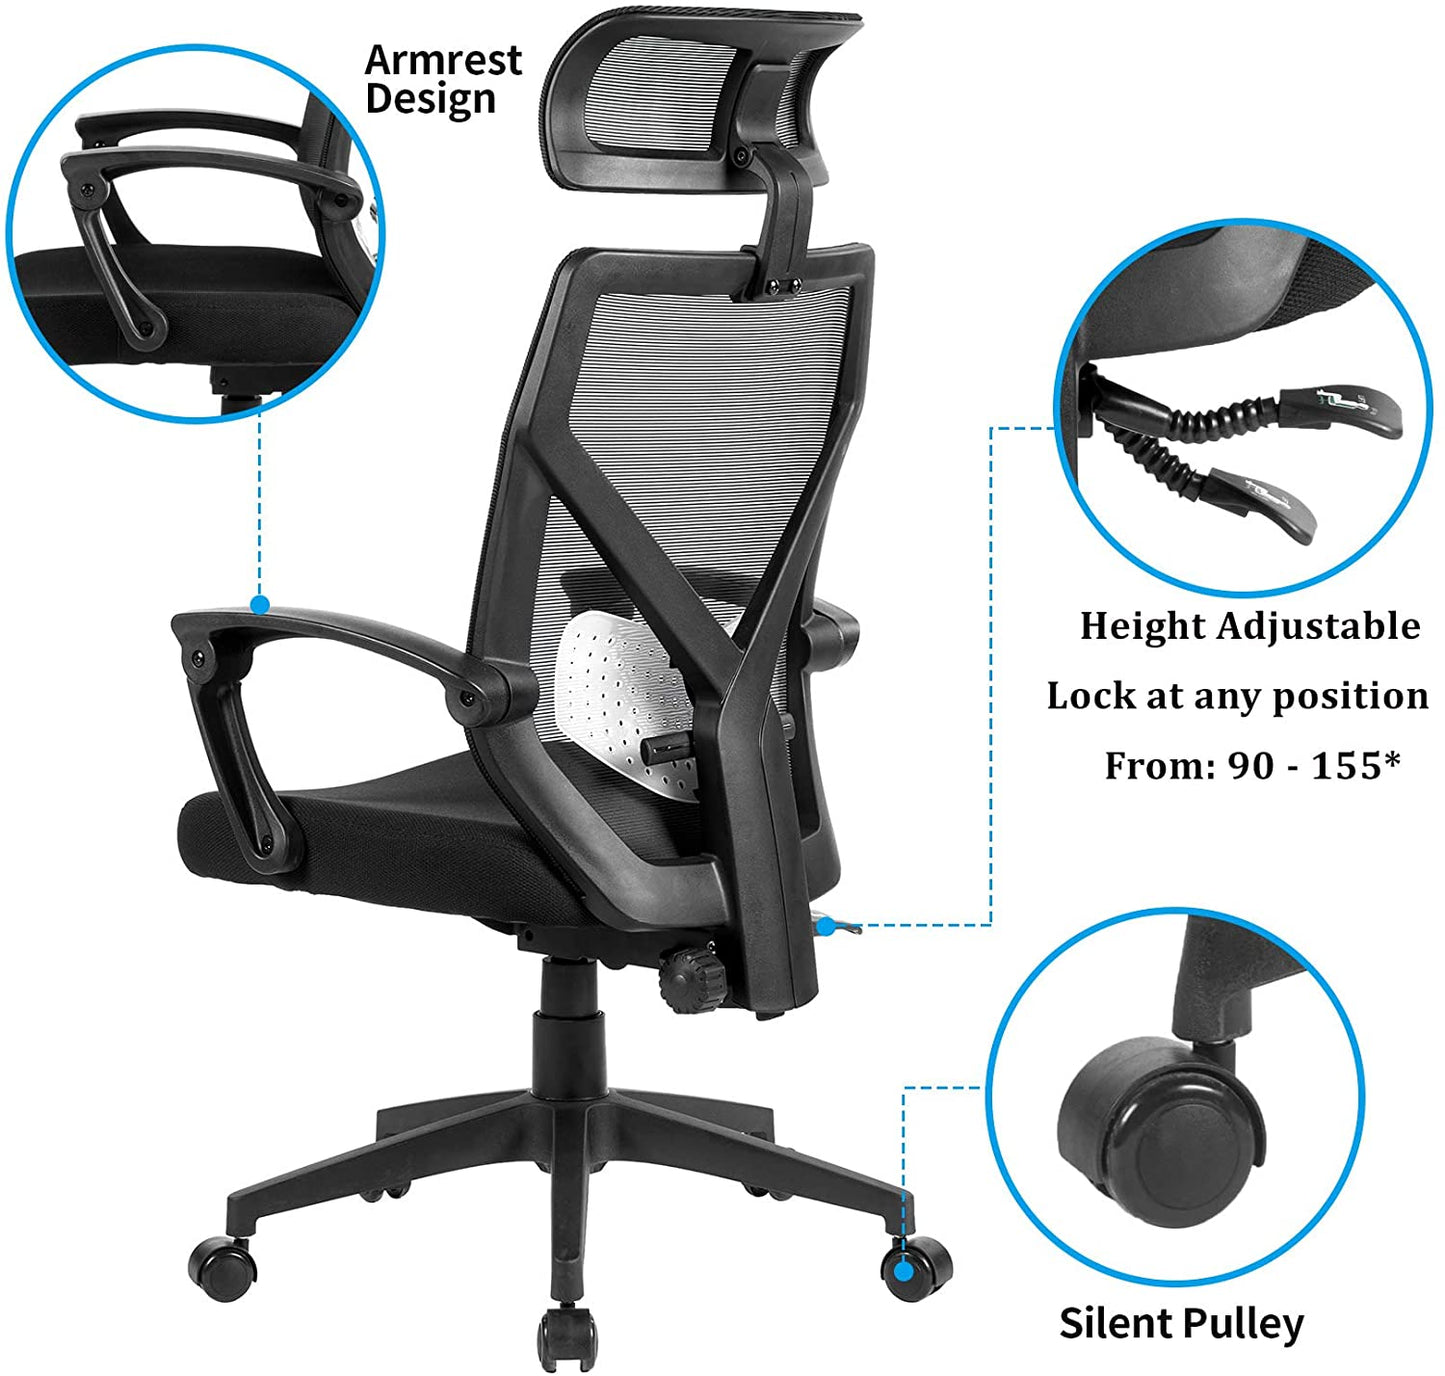 UNICOO - Home Office Chair Ergonomic Desk Chair High-Back Mesh Computer Chair Lumbar Support Comfortable Executive Adjustable Rolling Swivel Task Chair with Armrests (W-203C - Black)